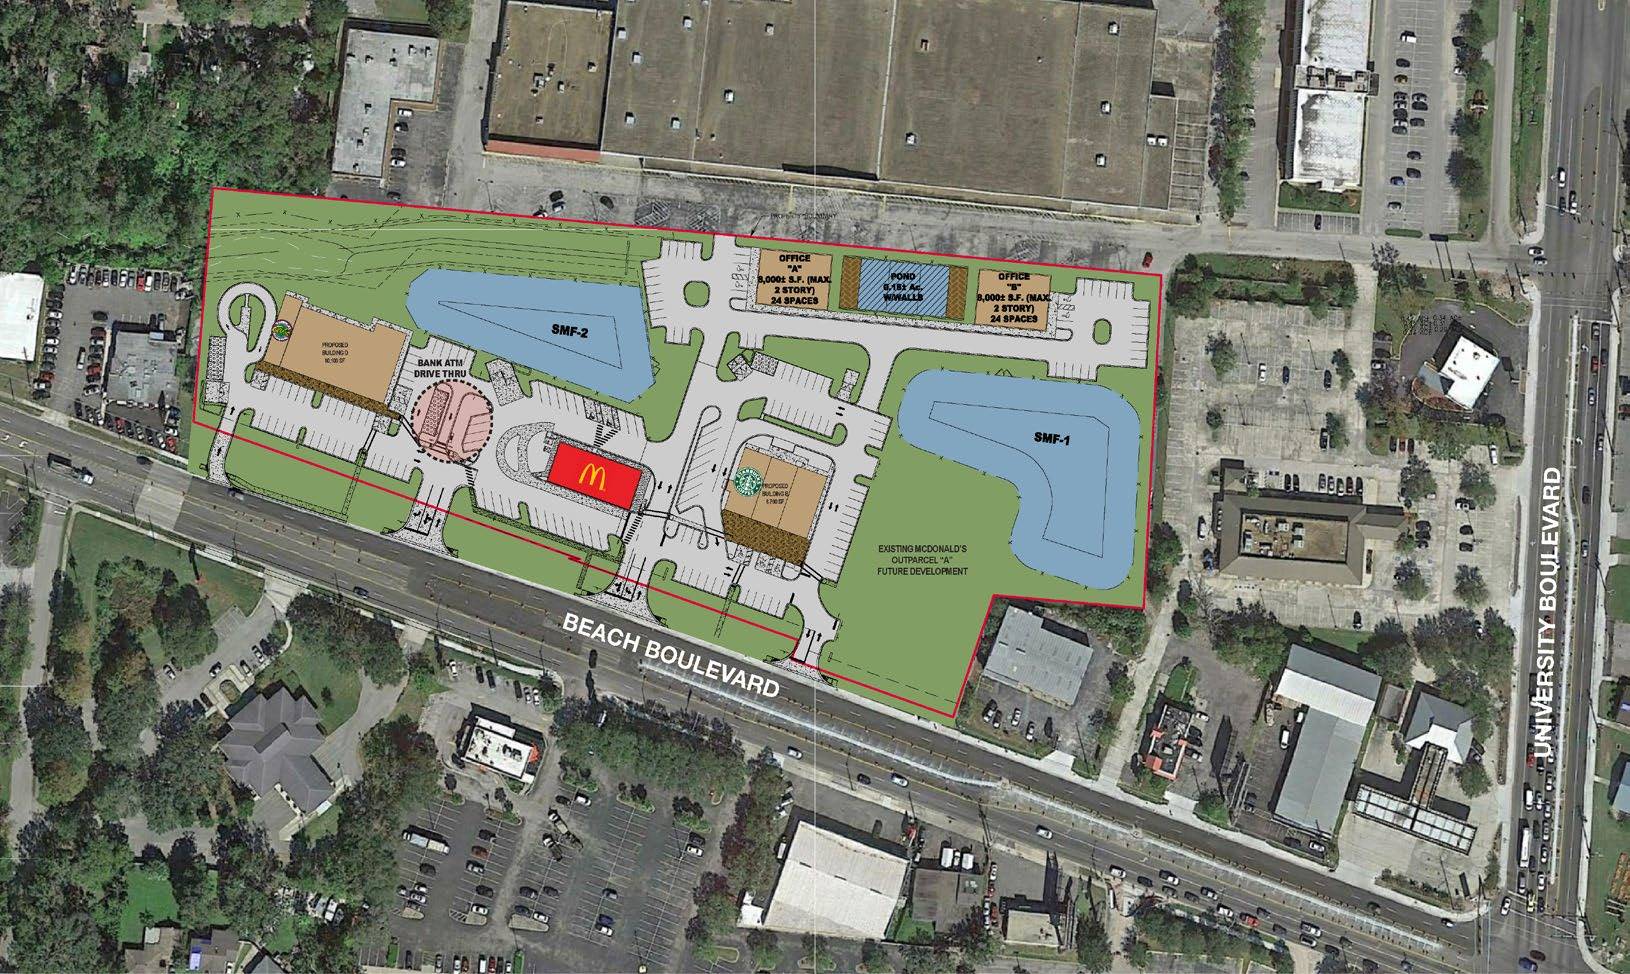 Hallmark Partners is developing Boulevard Crossing on the parking lot in front of the closed Kmart at Beach and University boulevards. The Kmart is not part of the project.